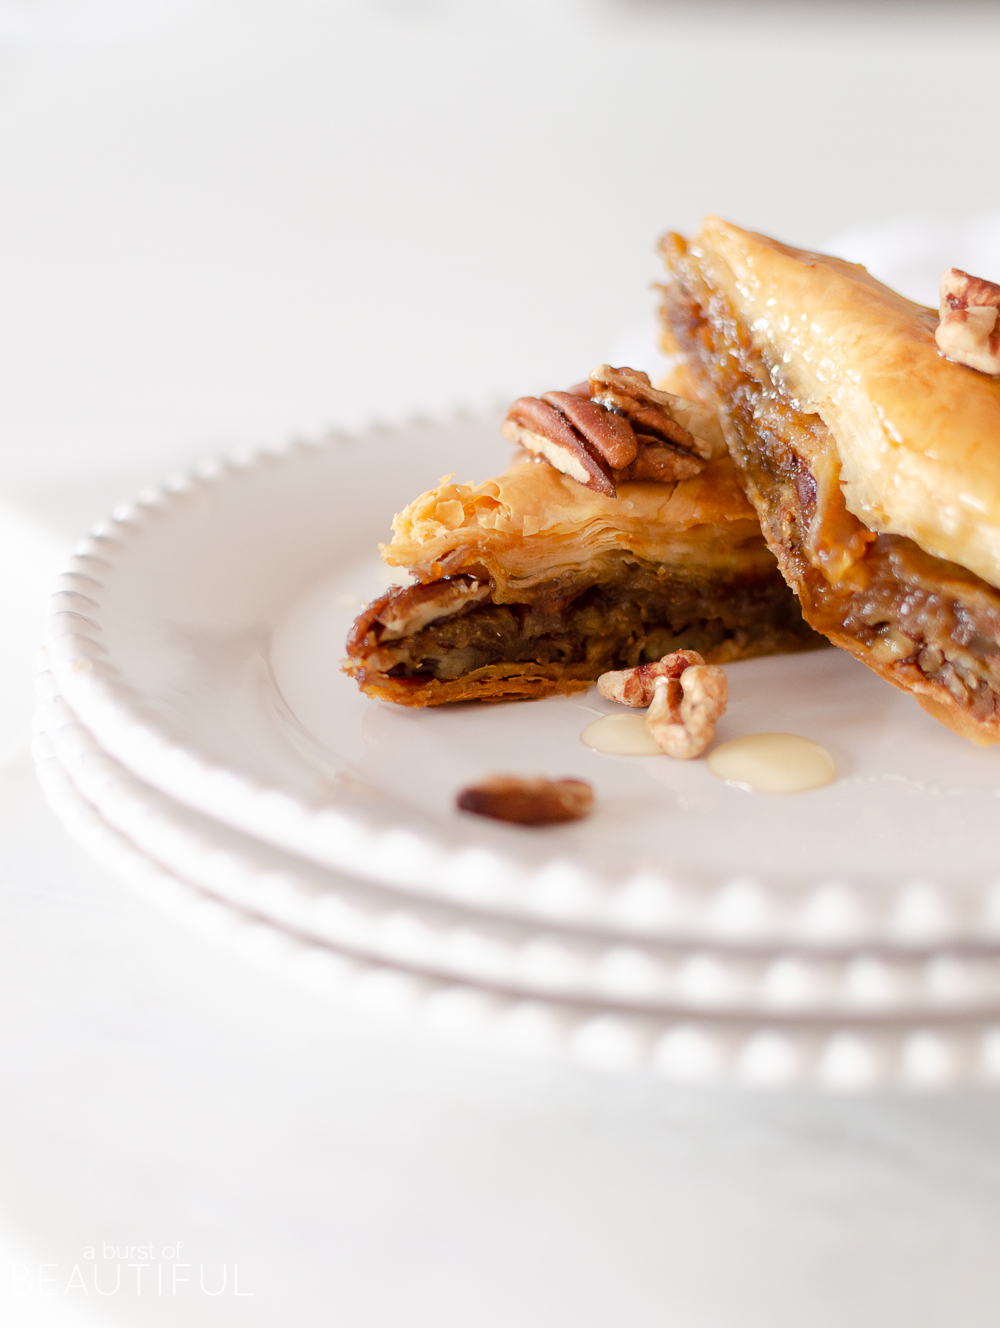 Our Pumpkin Pie Baklava is a modern variation to traditional Greek baklava recipes. Decadent pumpkin pie filling, pecans, and honey baked between layers of phyllo pastry create an irresistible fall dessert that will quickly become a seasonal favorite. 